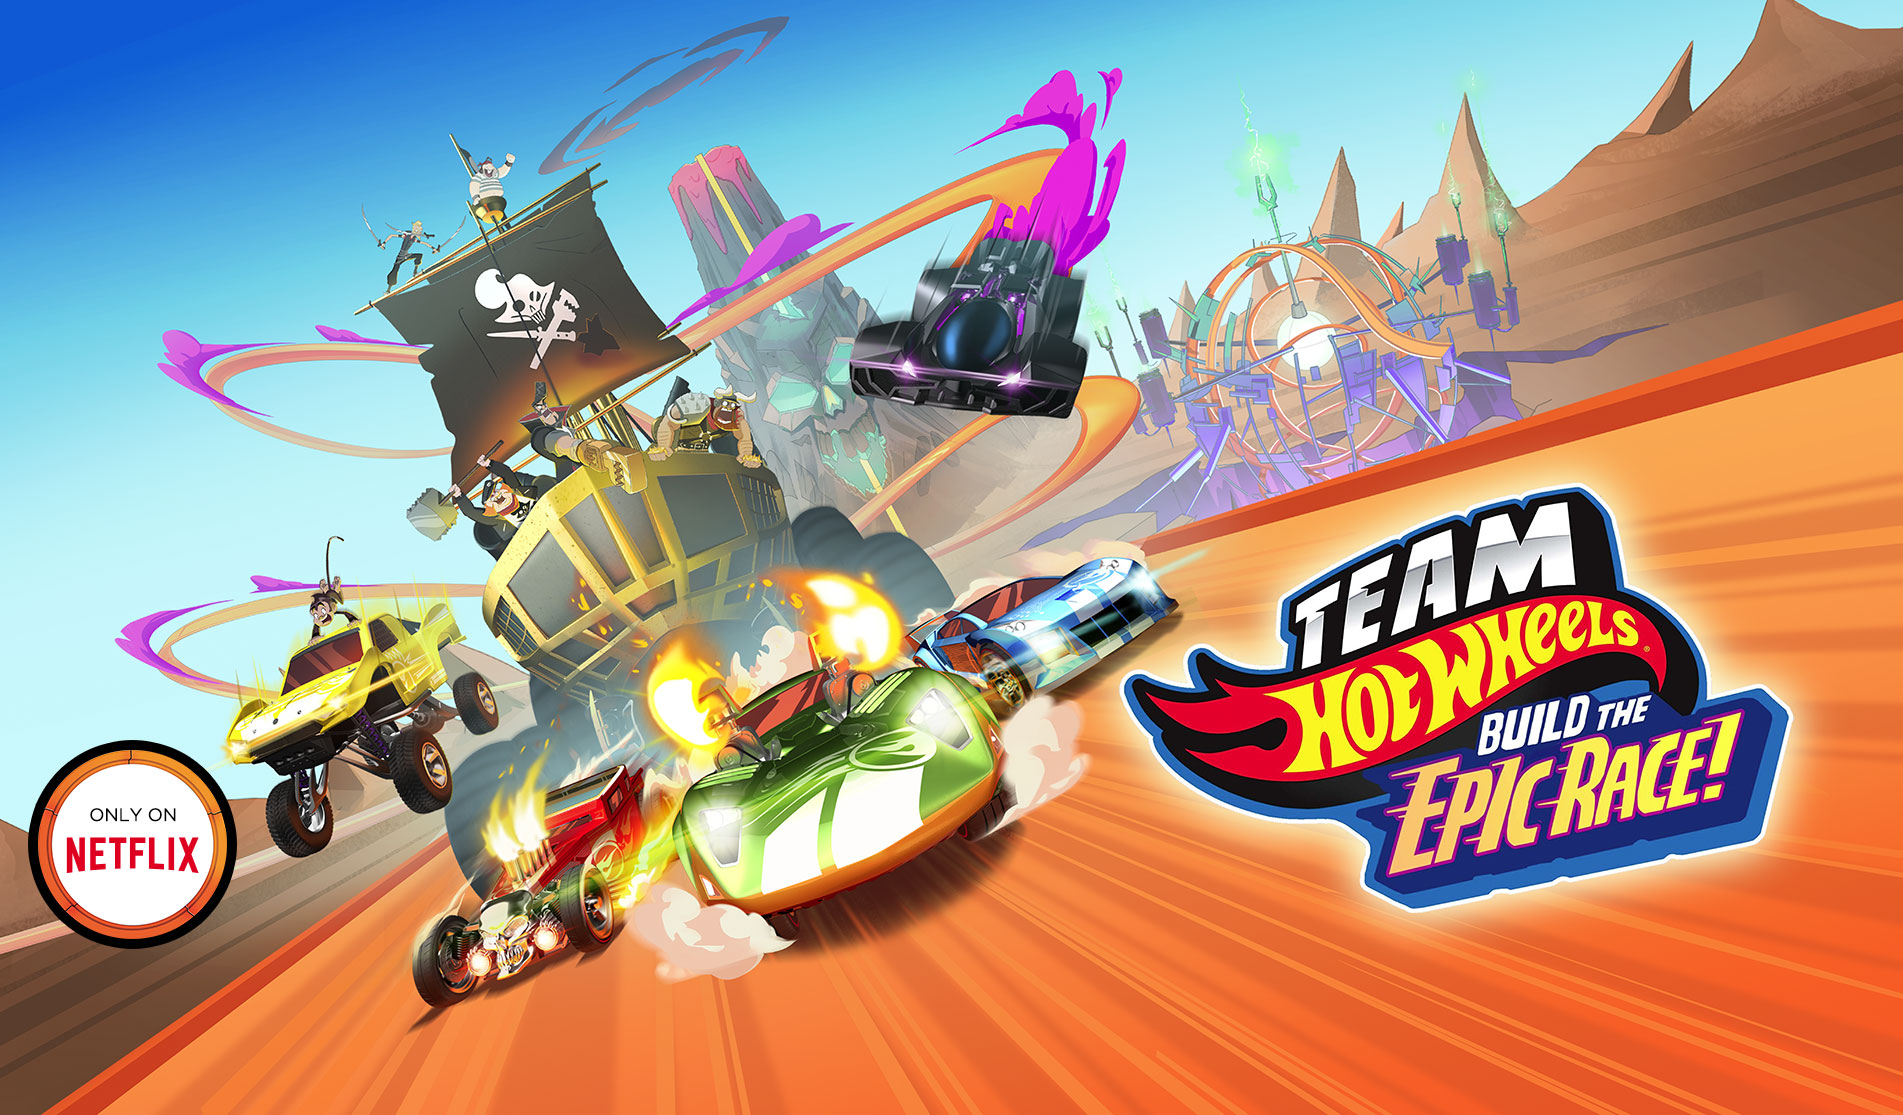 Hot Wheels Games, Toy Cars & Cool Videos. Hot Wheels